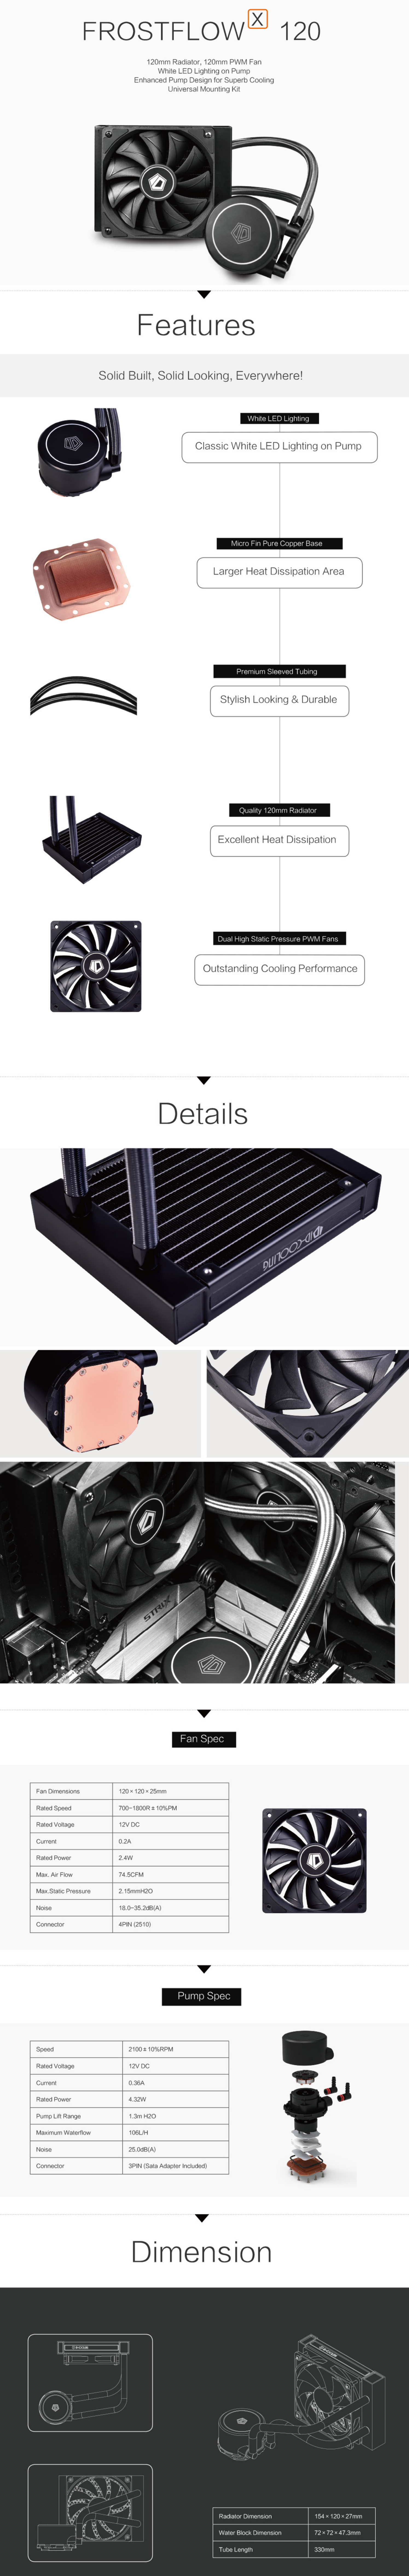 A large marketing image providing additional information about the product ID-COOLING FrostFlow X 120 White LED AIO CPU Liquid Cooler - Additional alt info not provided